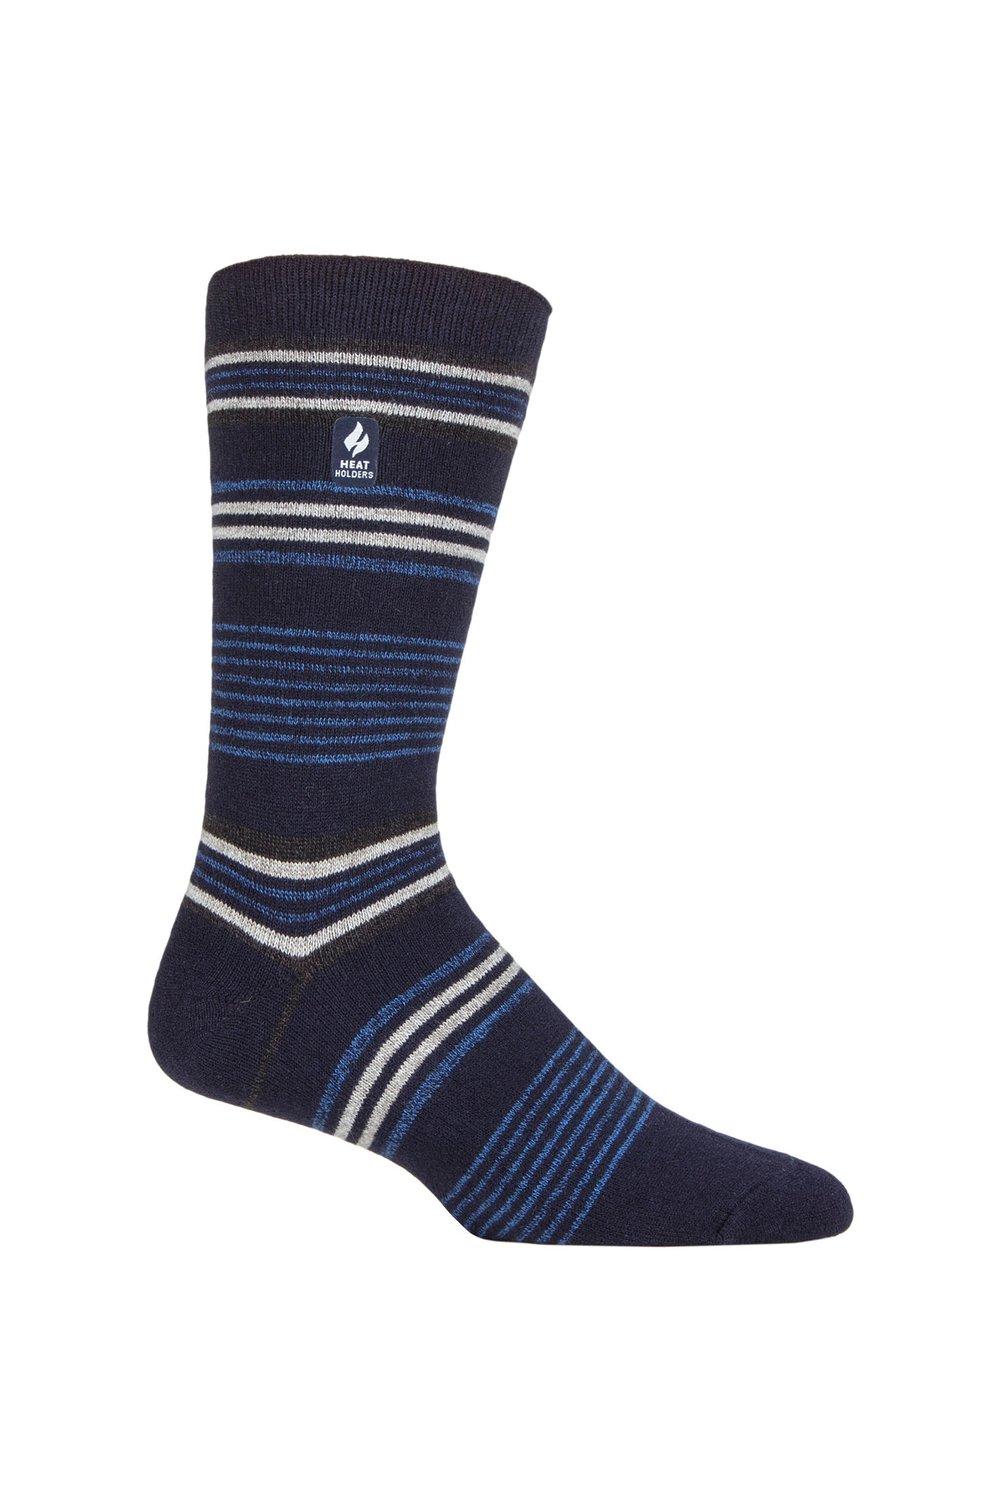 1 Pair 1.0 TOG Ultralite Striped, Argyle and Patterned Socks